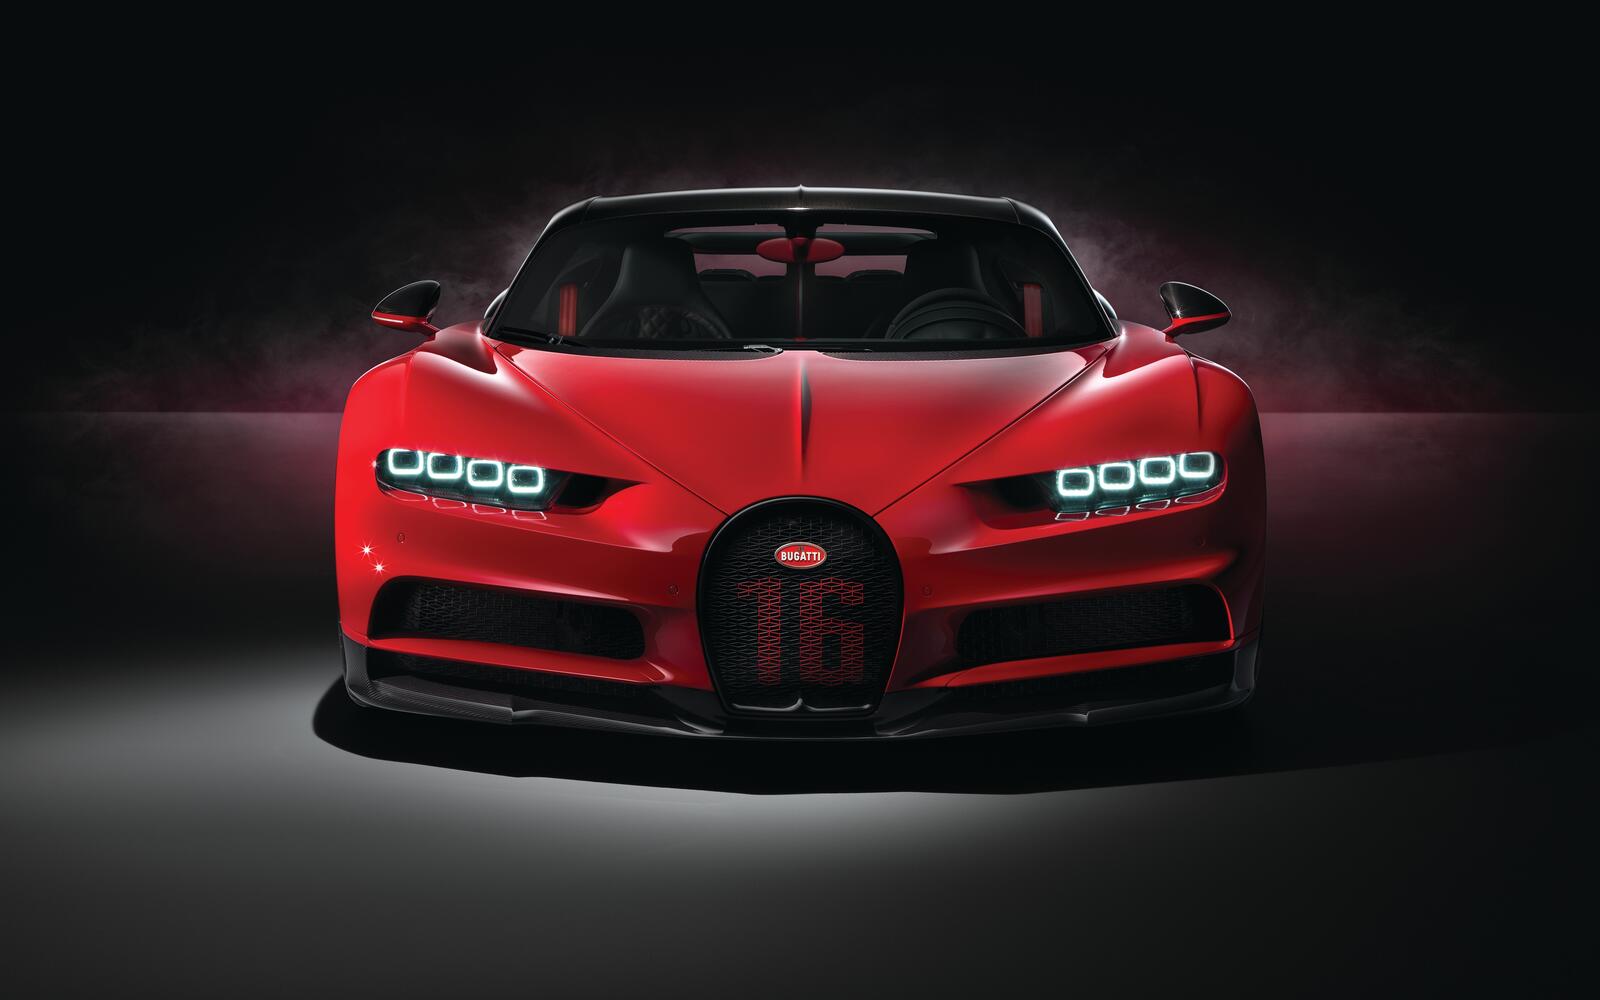 Wallpapers Bugatti Chiron automobiles red on the desktop